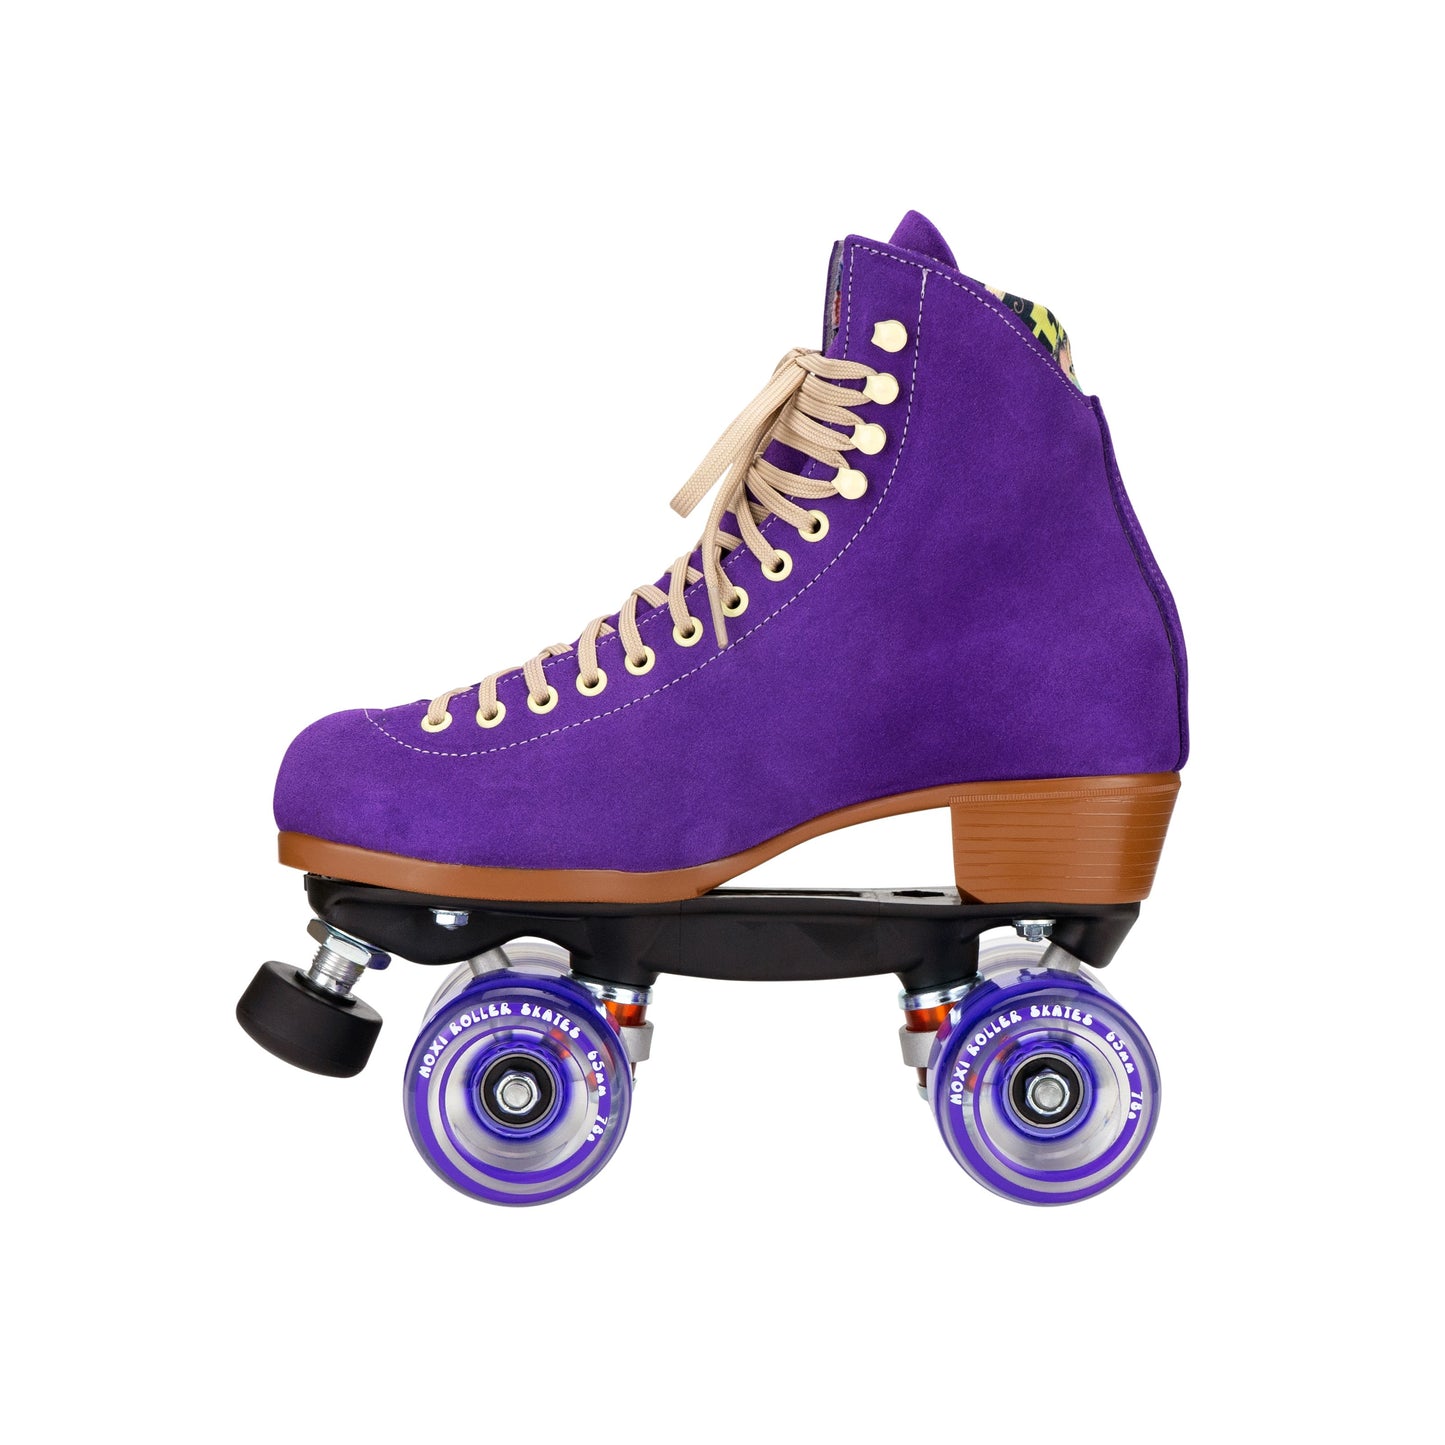 Come to Fresa's Roller Skate shop in Las Vegas and get your Moxi Lollys Skates.  These Purple Moxi Lolly Roller Skates are ready to the outdoor. Cruise around Las Vegas Art District or come and skate in our indoor skate ramp.